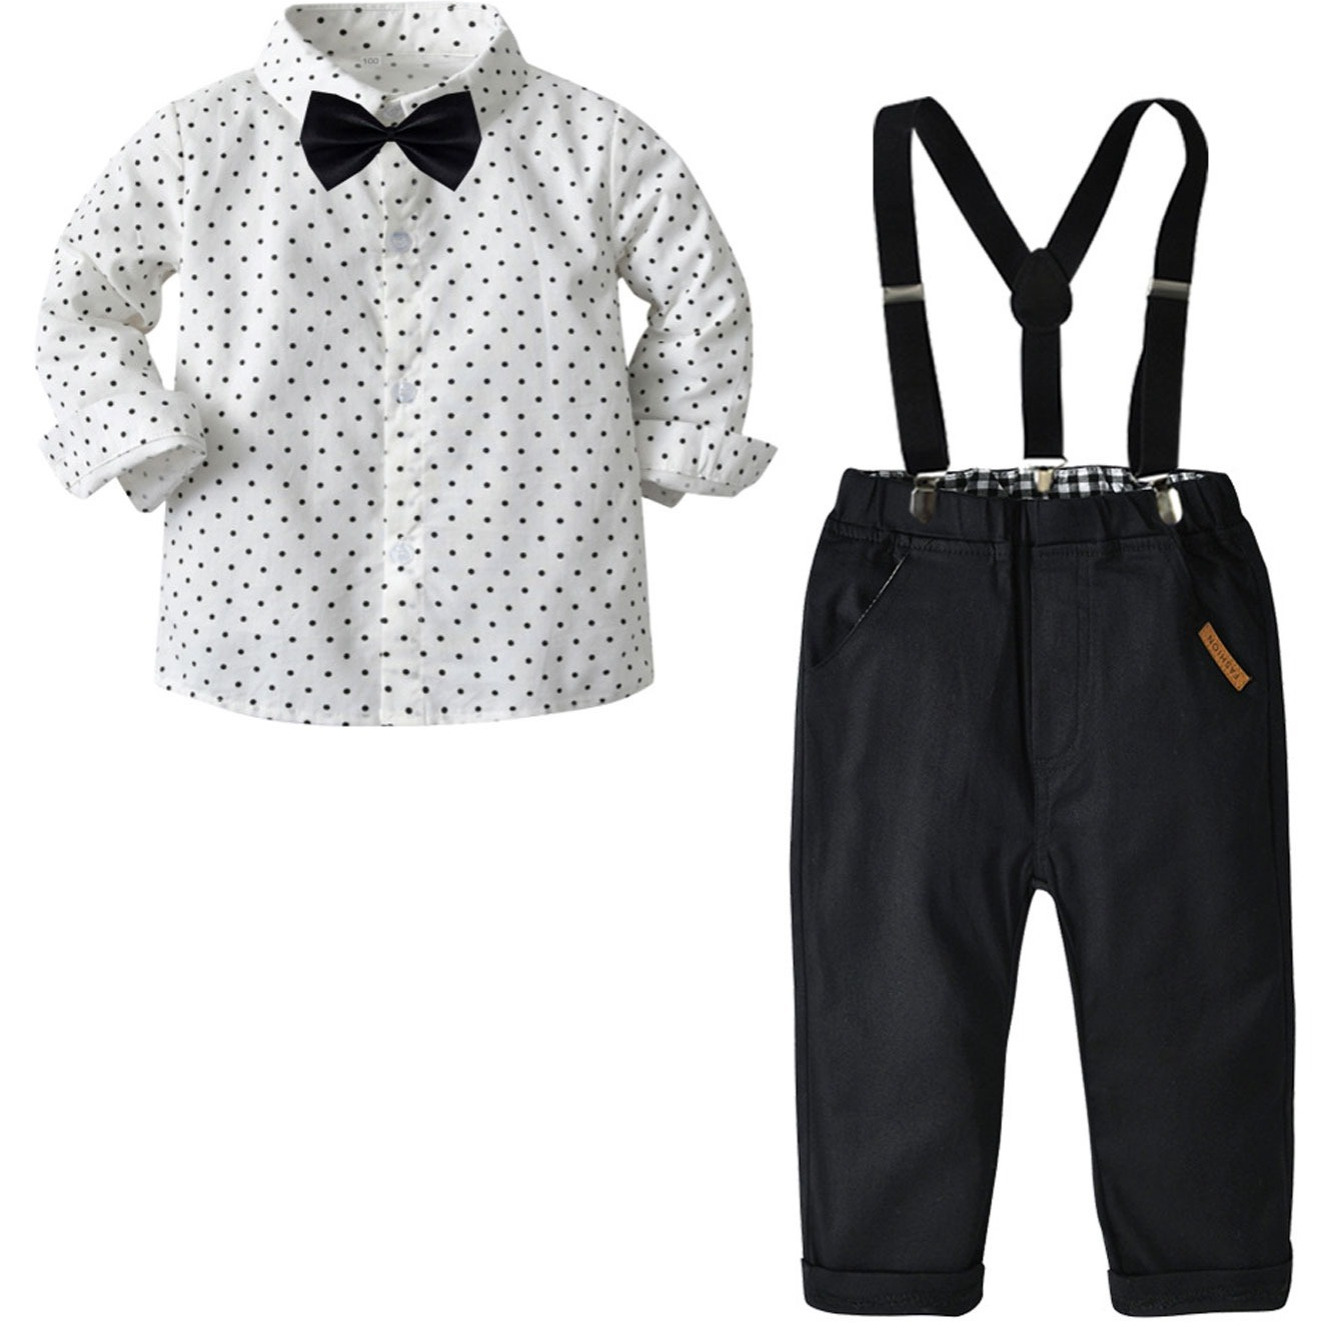 

Baby Boys Gentleman Outfit Long Sleeve Polka Dot Shirt & Suspender Pants With Bow Set Kids Clothes